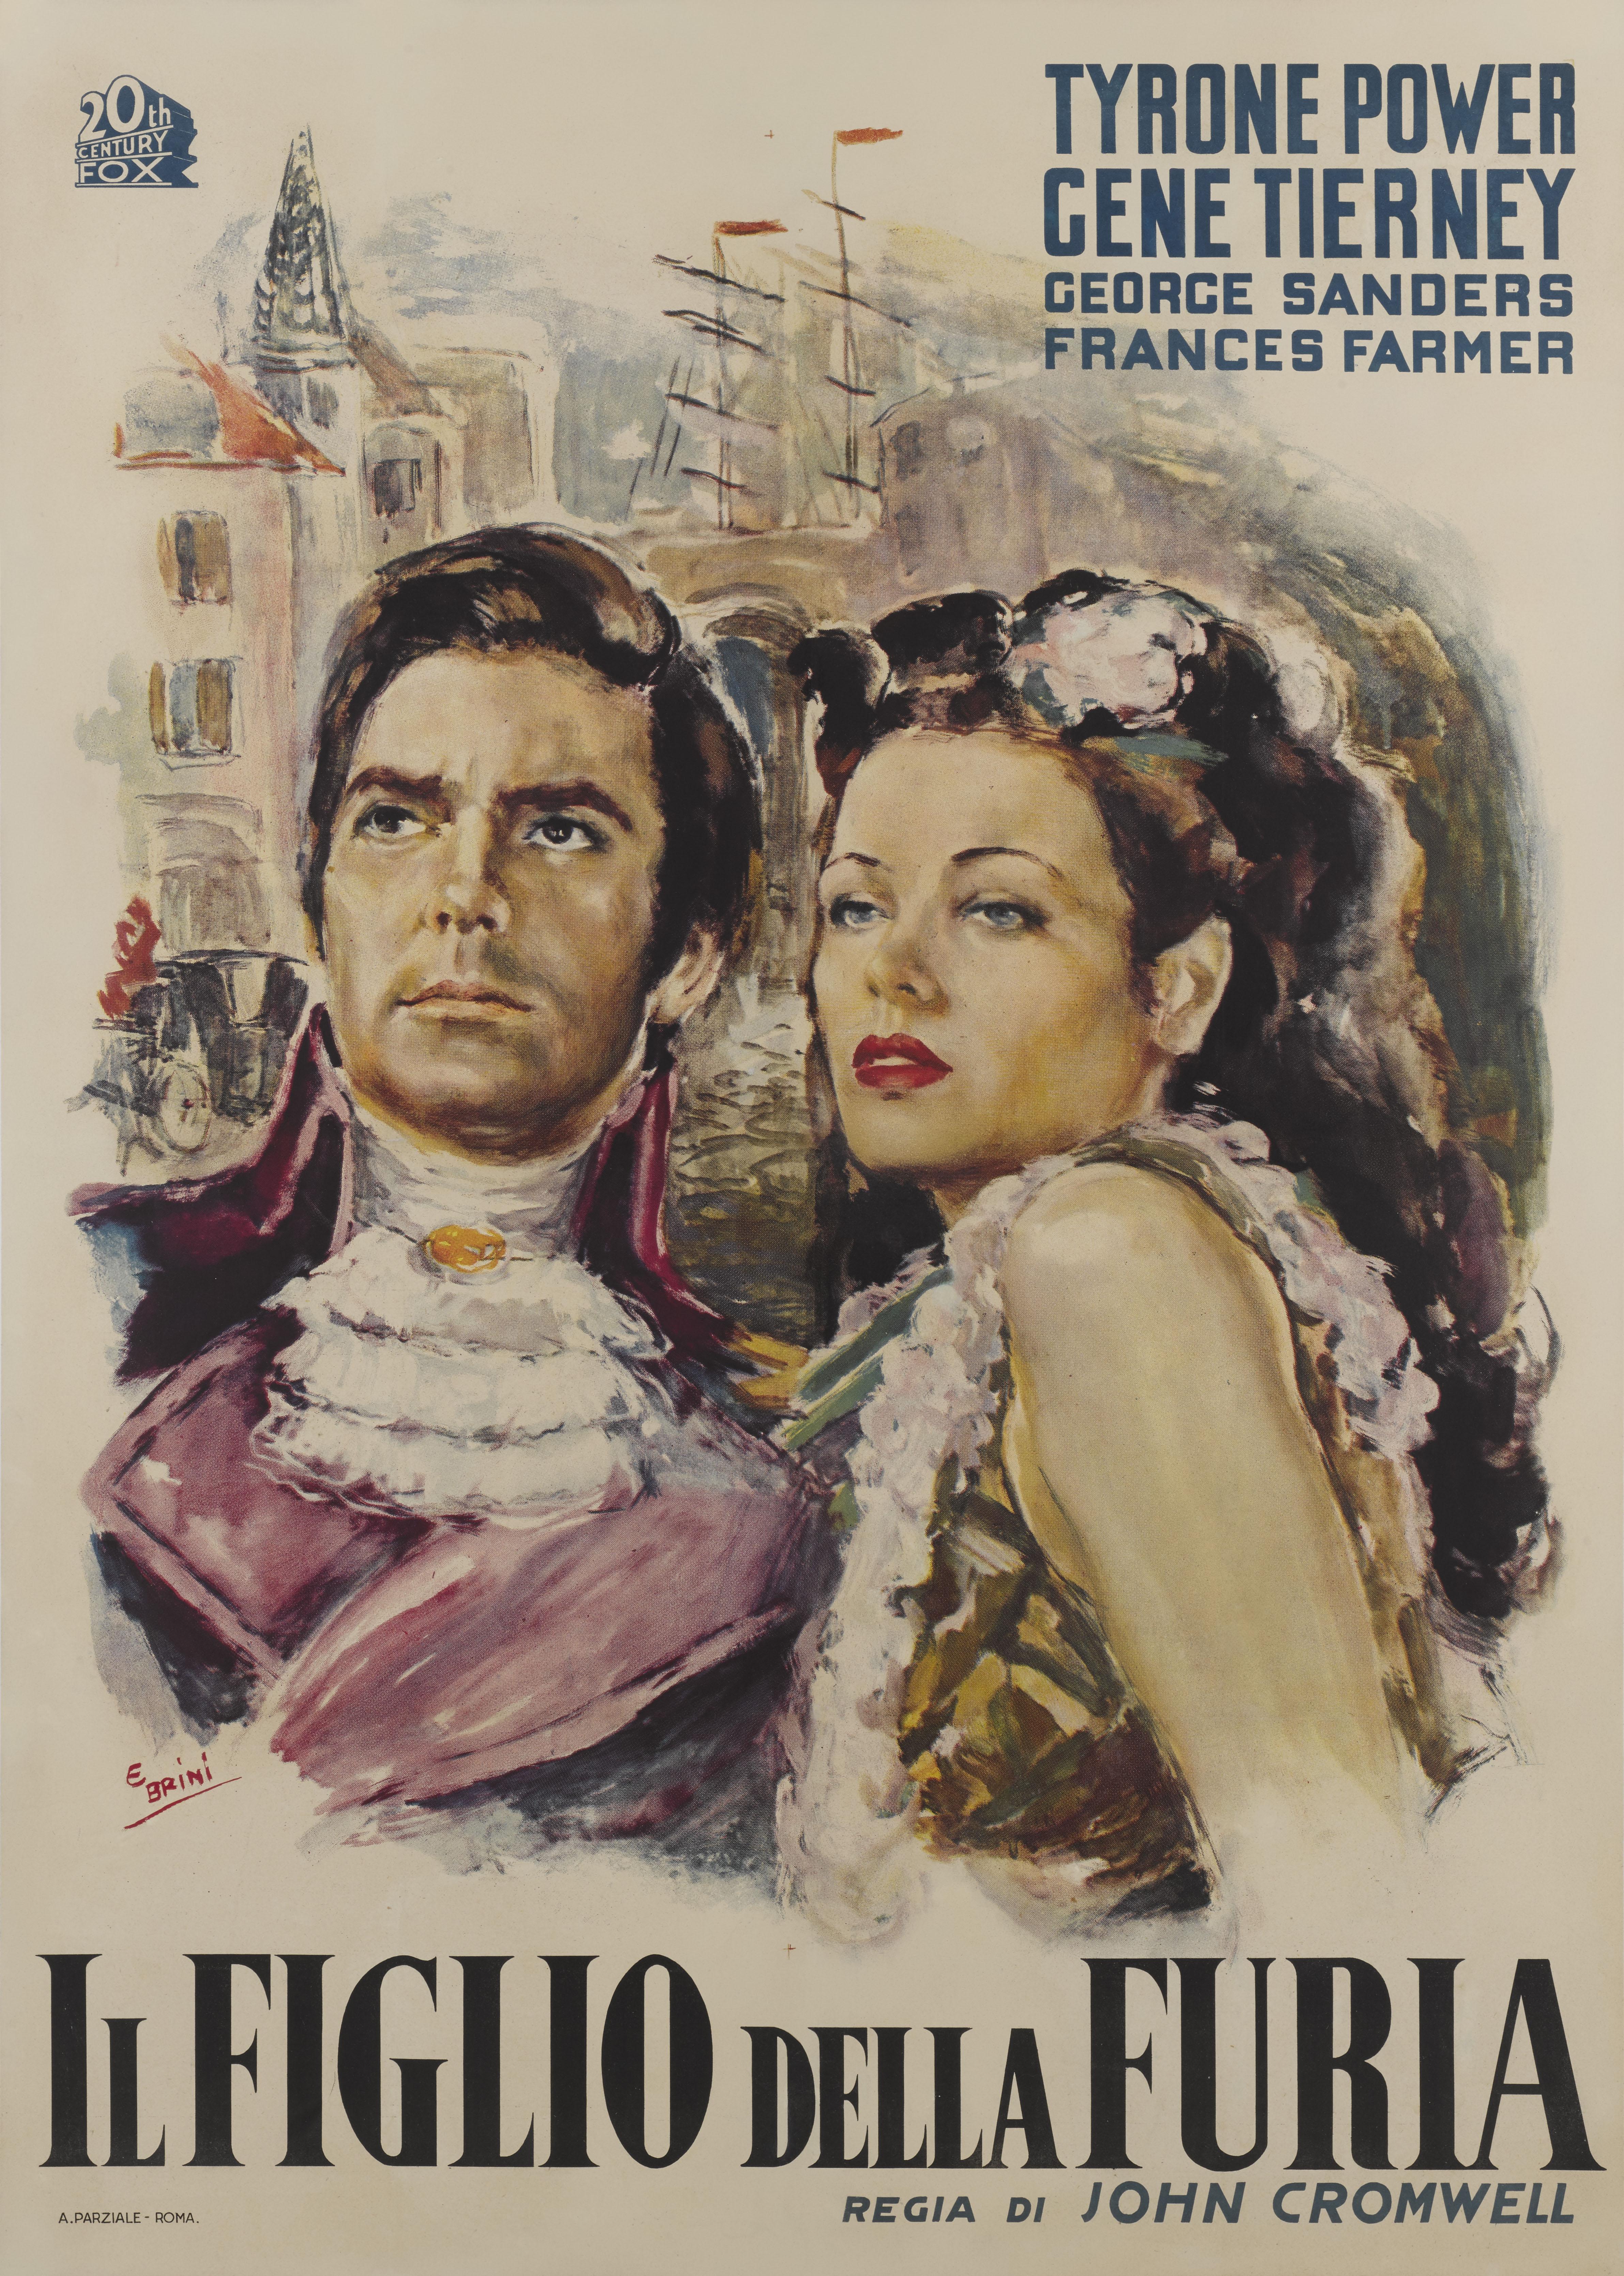 Original Italian film poster for the 1942 film Son of Fury starring Tyrone Power, Gene Tierney and George Sanders.
This film was directed by John Cromwell. This poster was created by the wonderful Italian artist Ercole Brini (1913-1989) and used